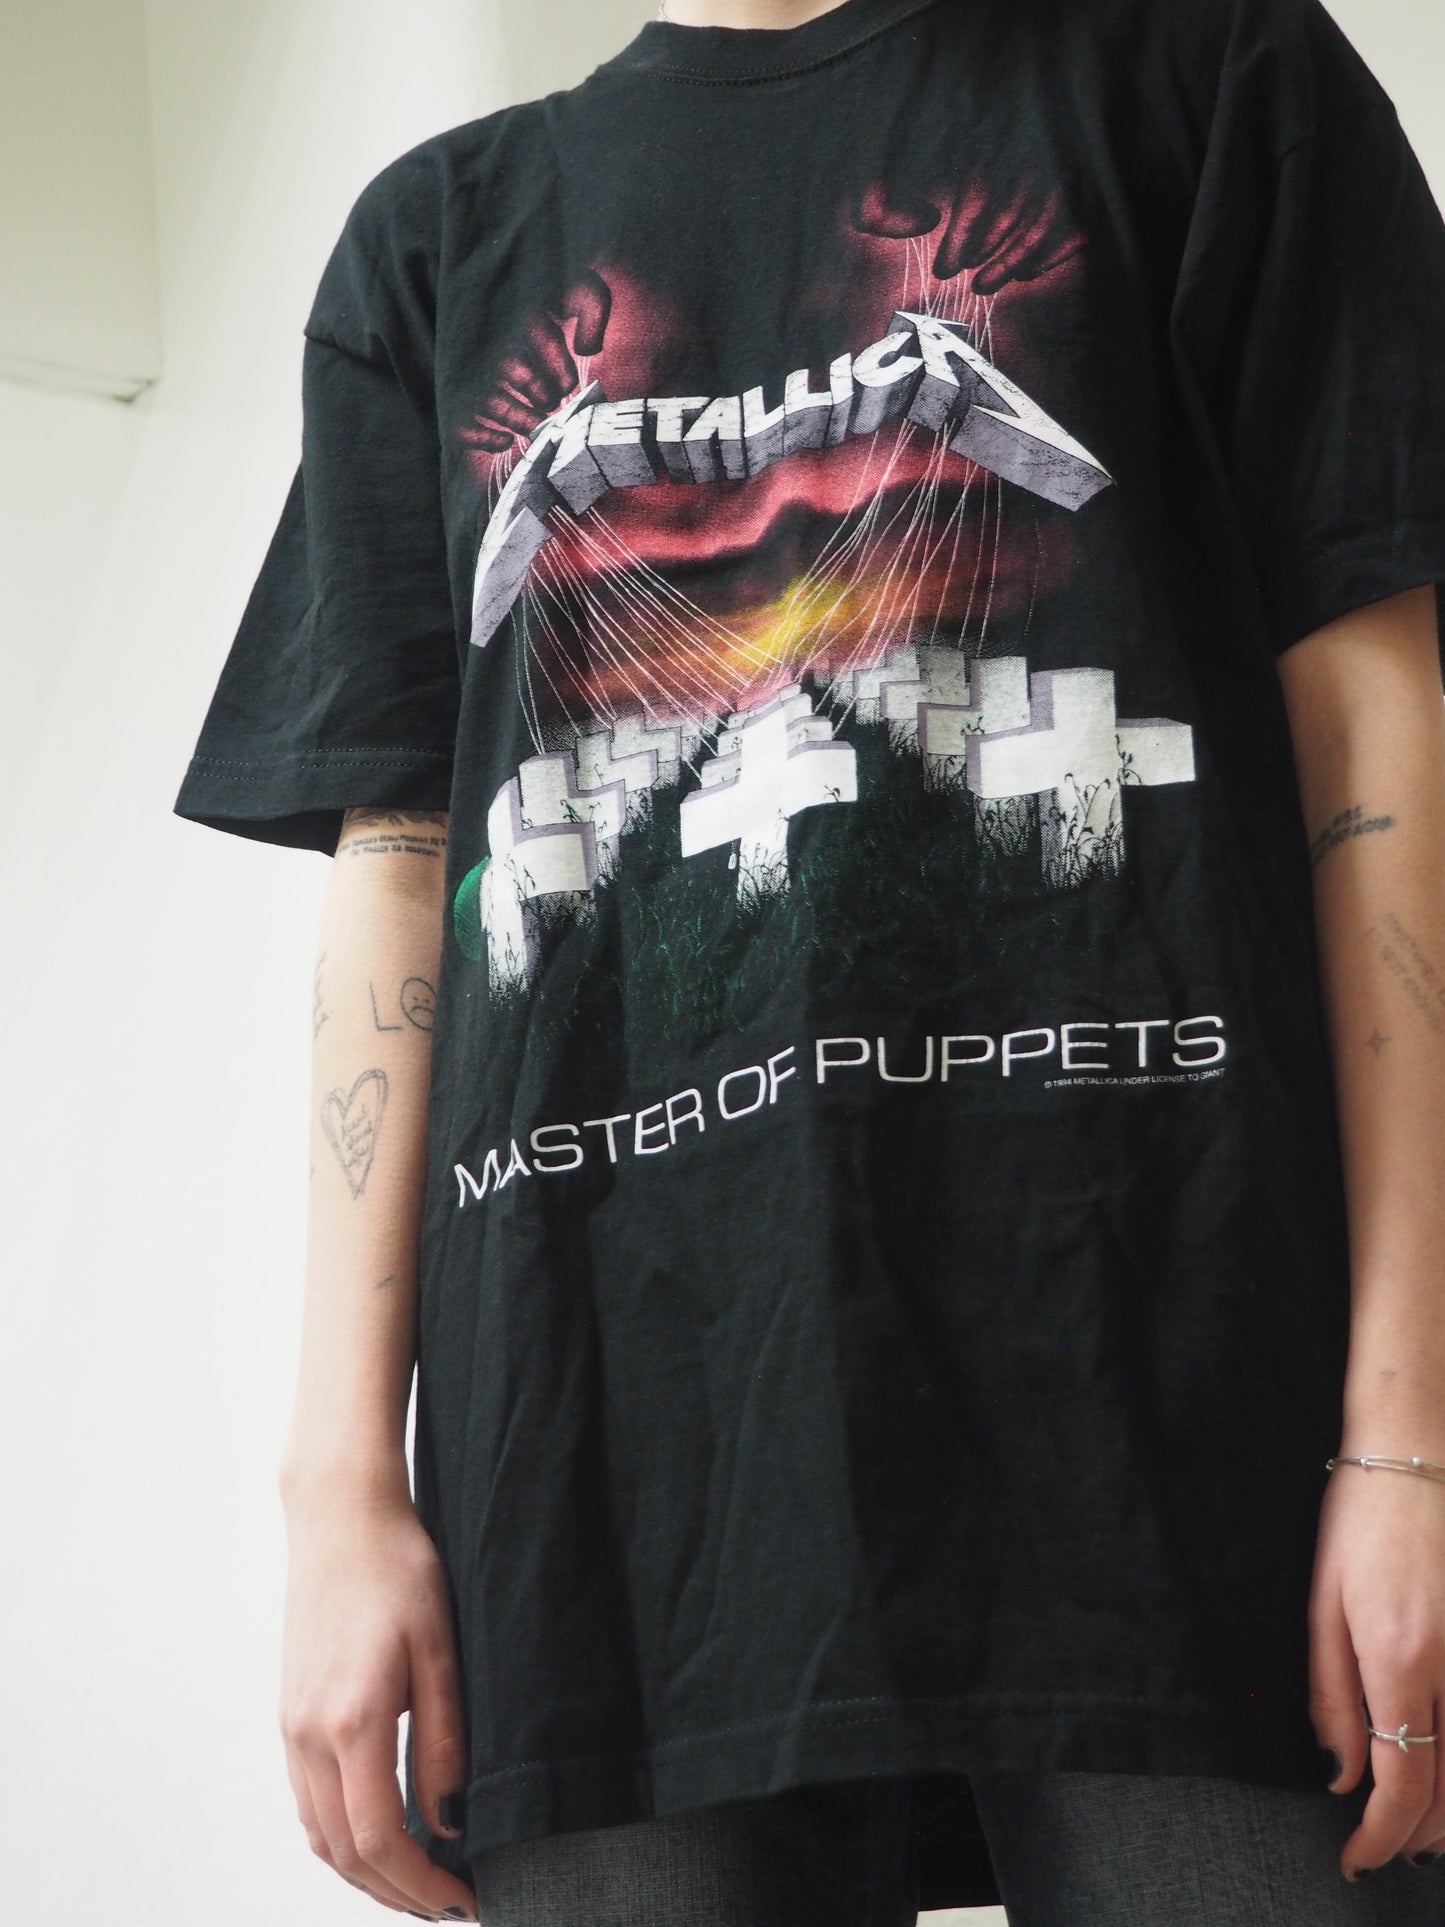 Vintage Metallica "Master of Puppets" 1994 - t-shirt - size XL